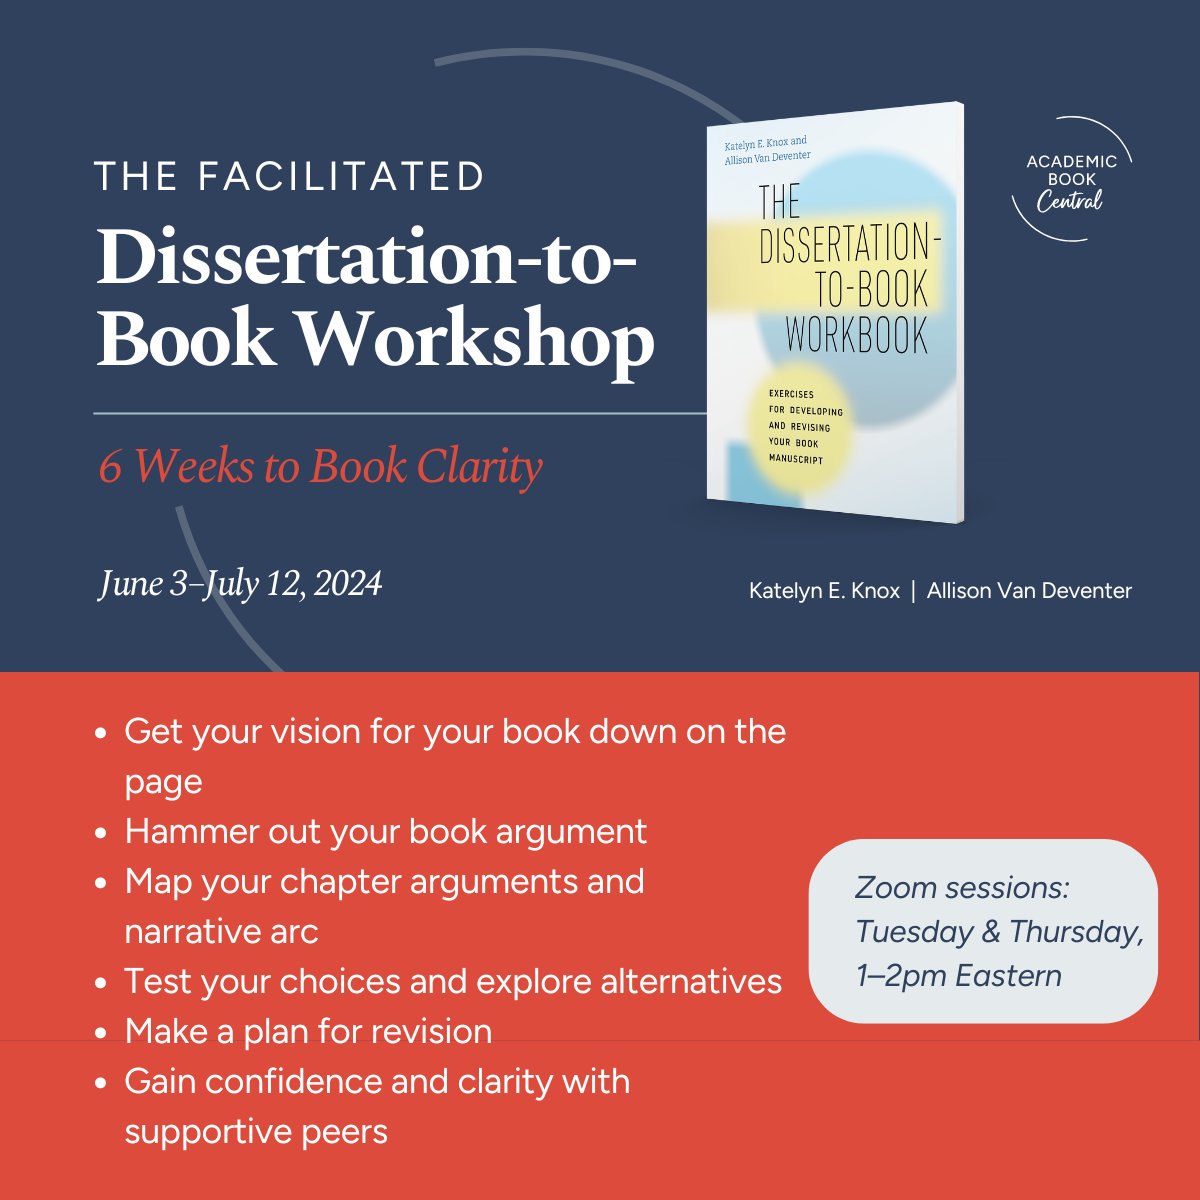 Academic book authors: The last day for the Early Bird discount for The Dissertation-to-Book Workshop is Wed., May 15! Join us to work through The Dissertation-to-Book Workbook (@UChicagoPress) with a supportive cohort! #AcademicTwitter workshops.dissertationtobook.com/p/6-week-summe…